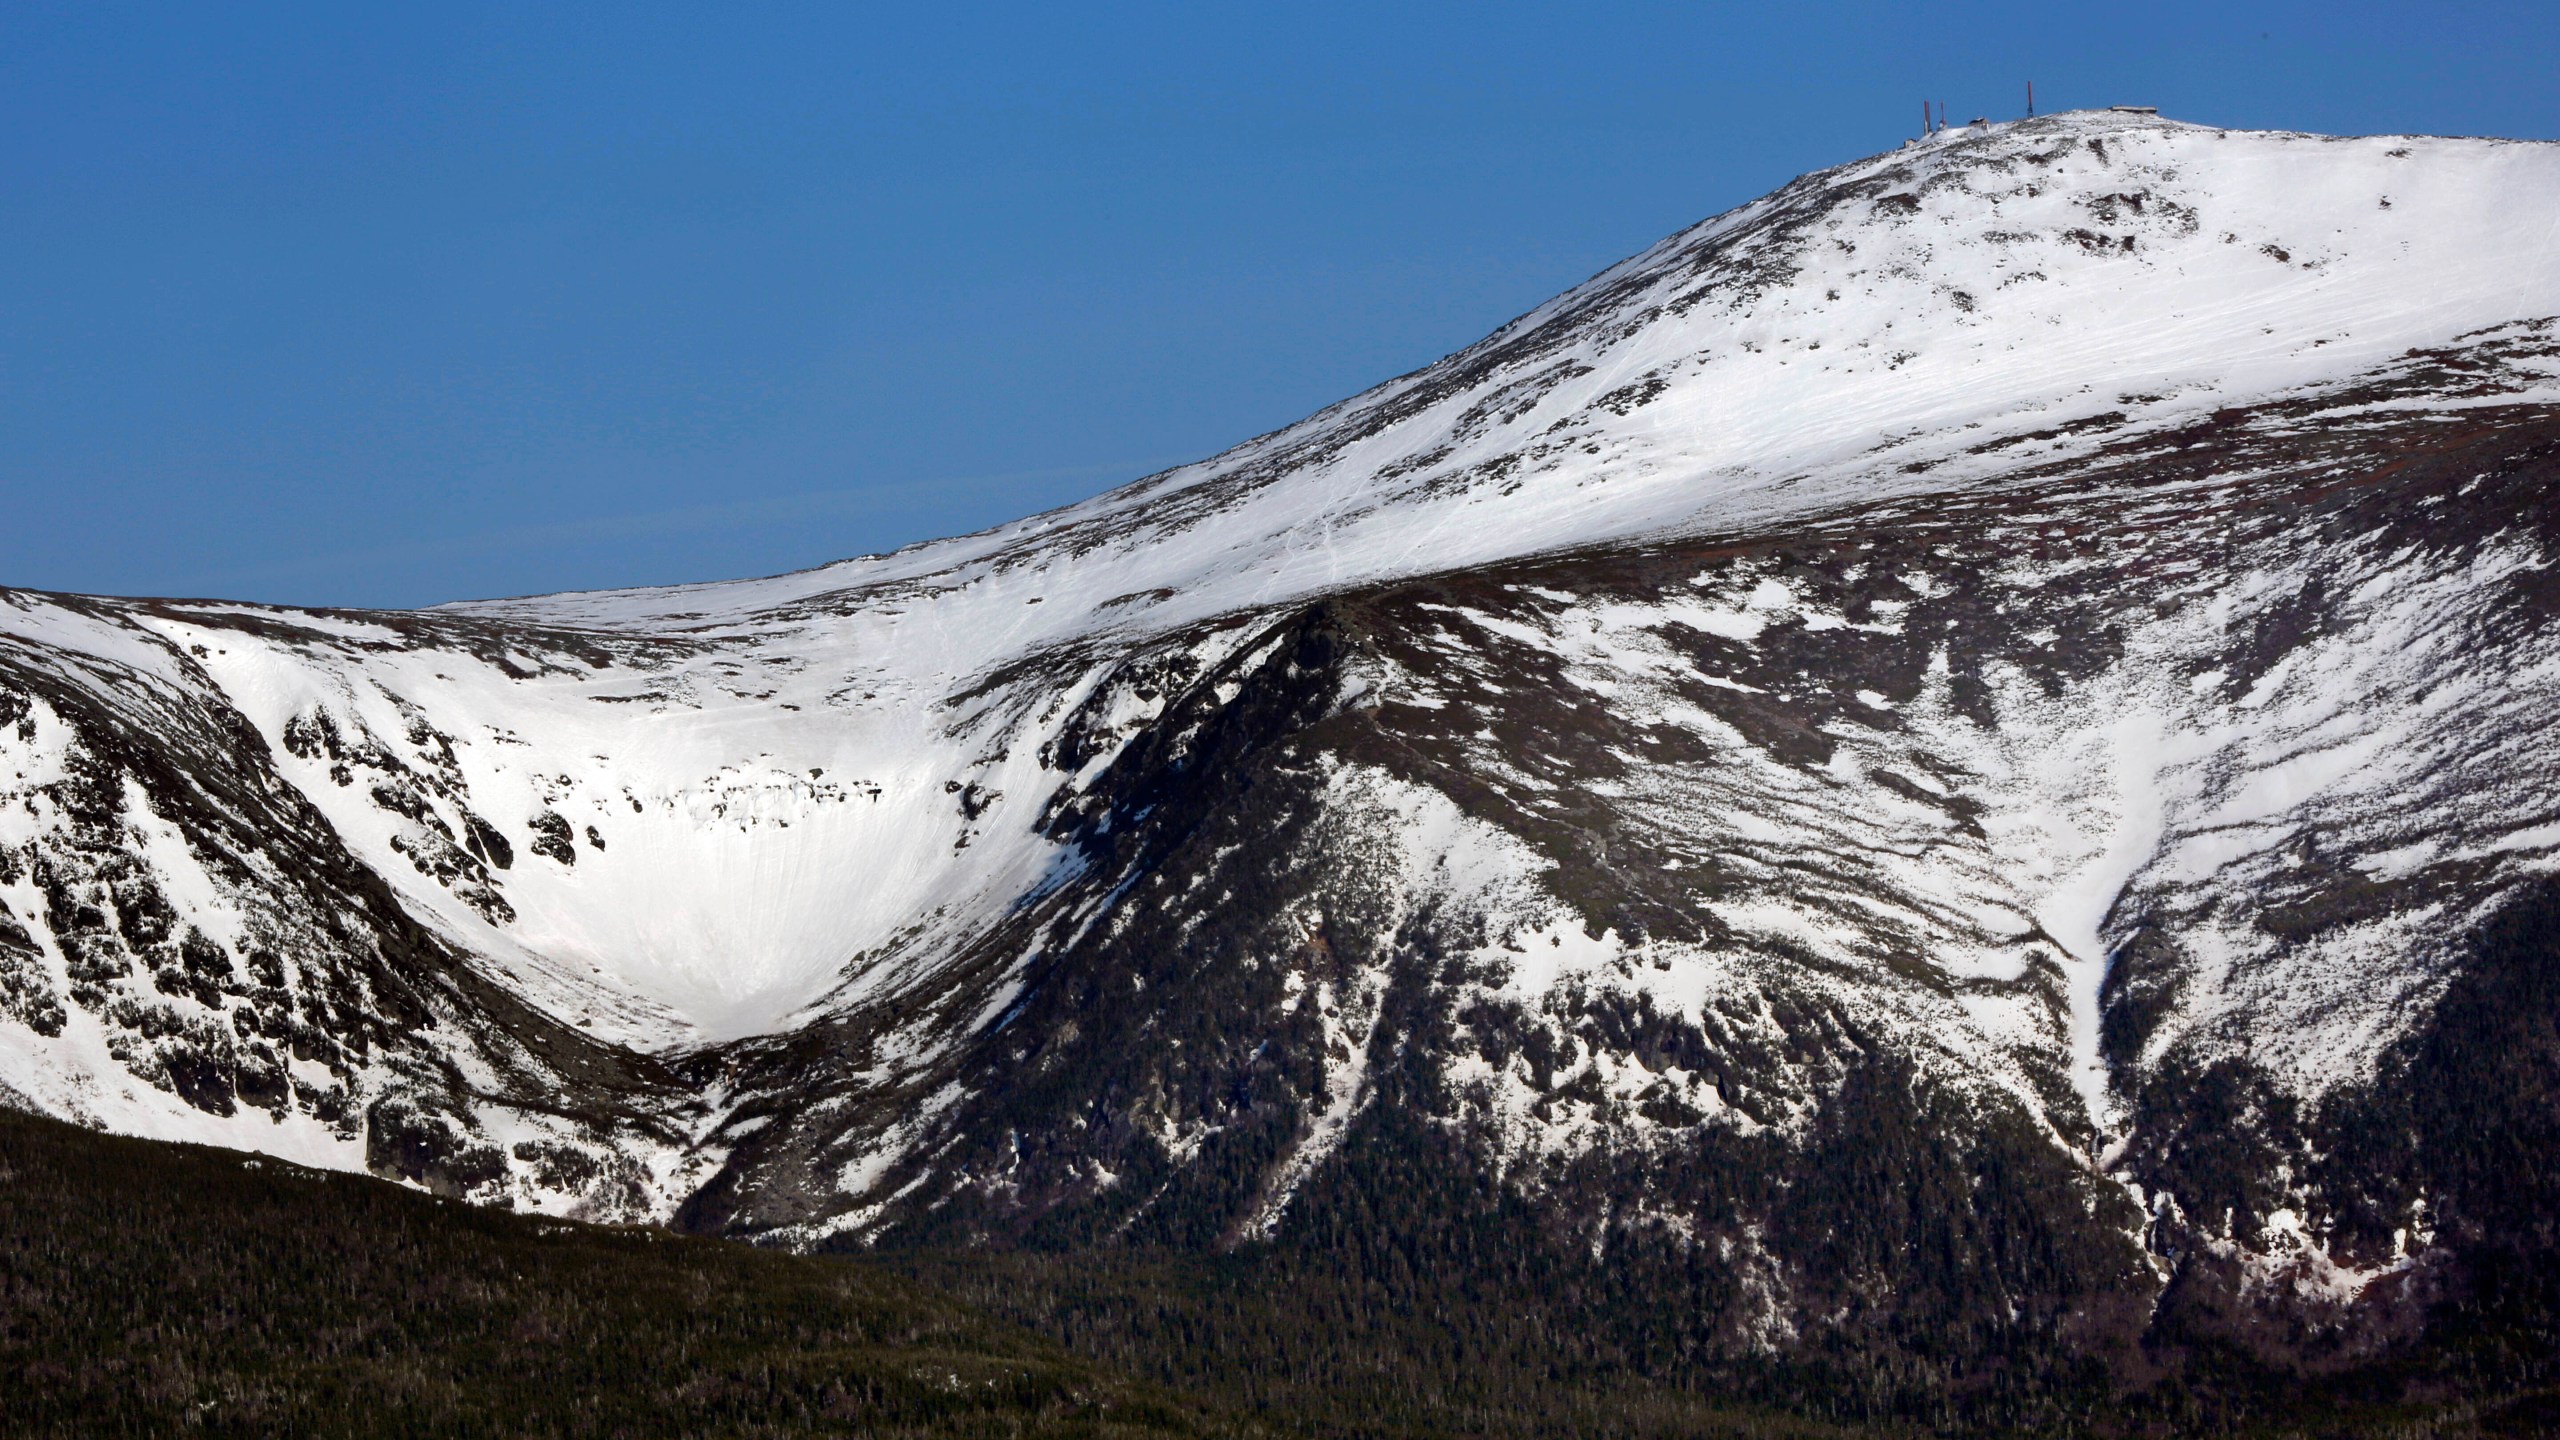 FILE - Tuckerman Ravine is seen at left, about one mile below the summit of 6,288-foot Mount Washington, in New Hampshire, Monday, May 4, 2015. (AP Photo/Robert F. Bukaty, File)